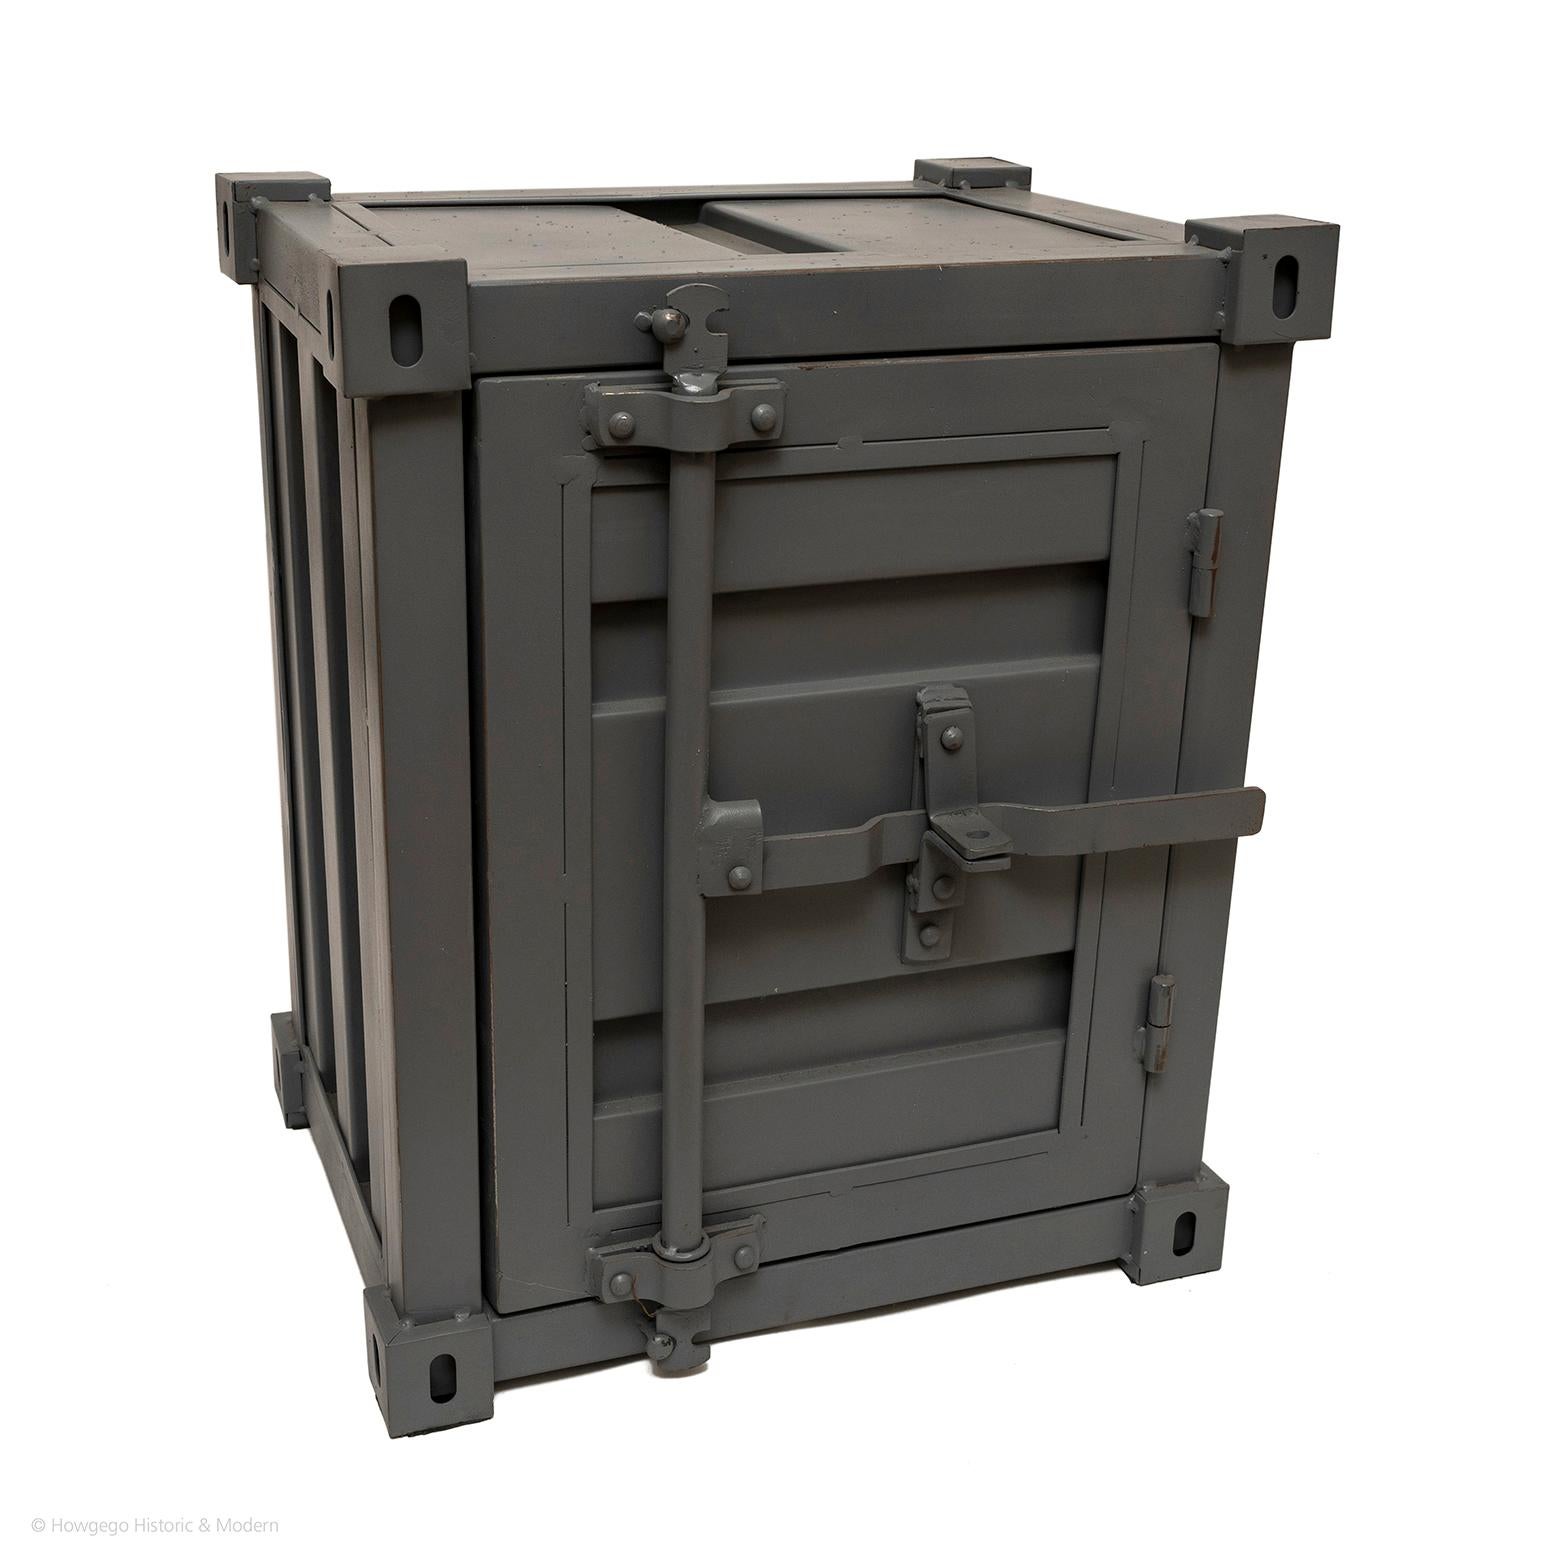 Dual purpose can serve as a safe and sidetable
Stylish conversation piece for the interior
The central bar locks the safe which could be secured with a padlock.  
The inside cupboard with shelf

Length 46cm., 18